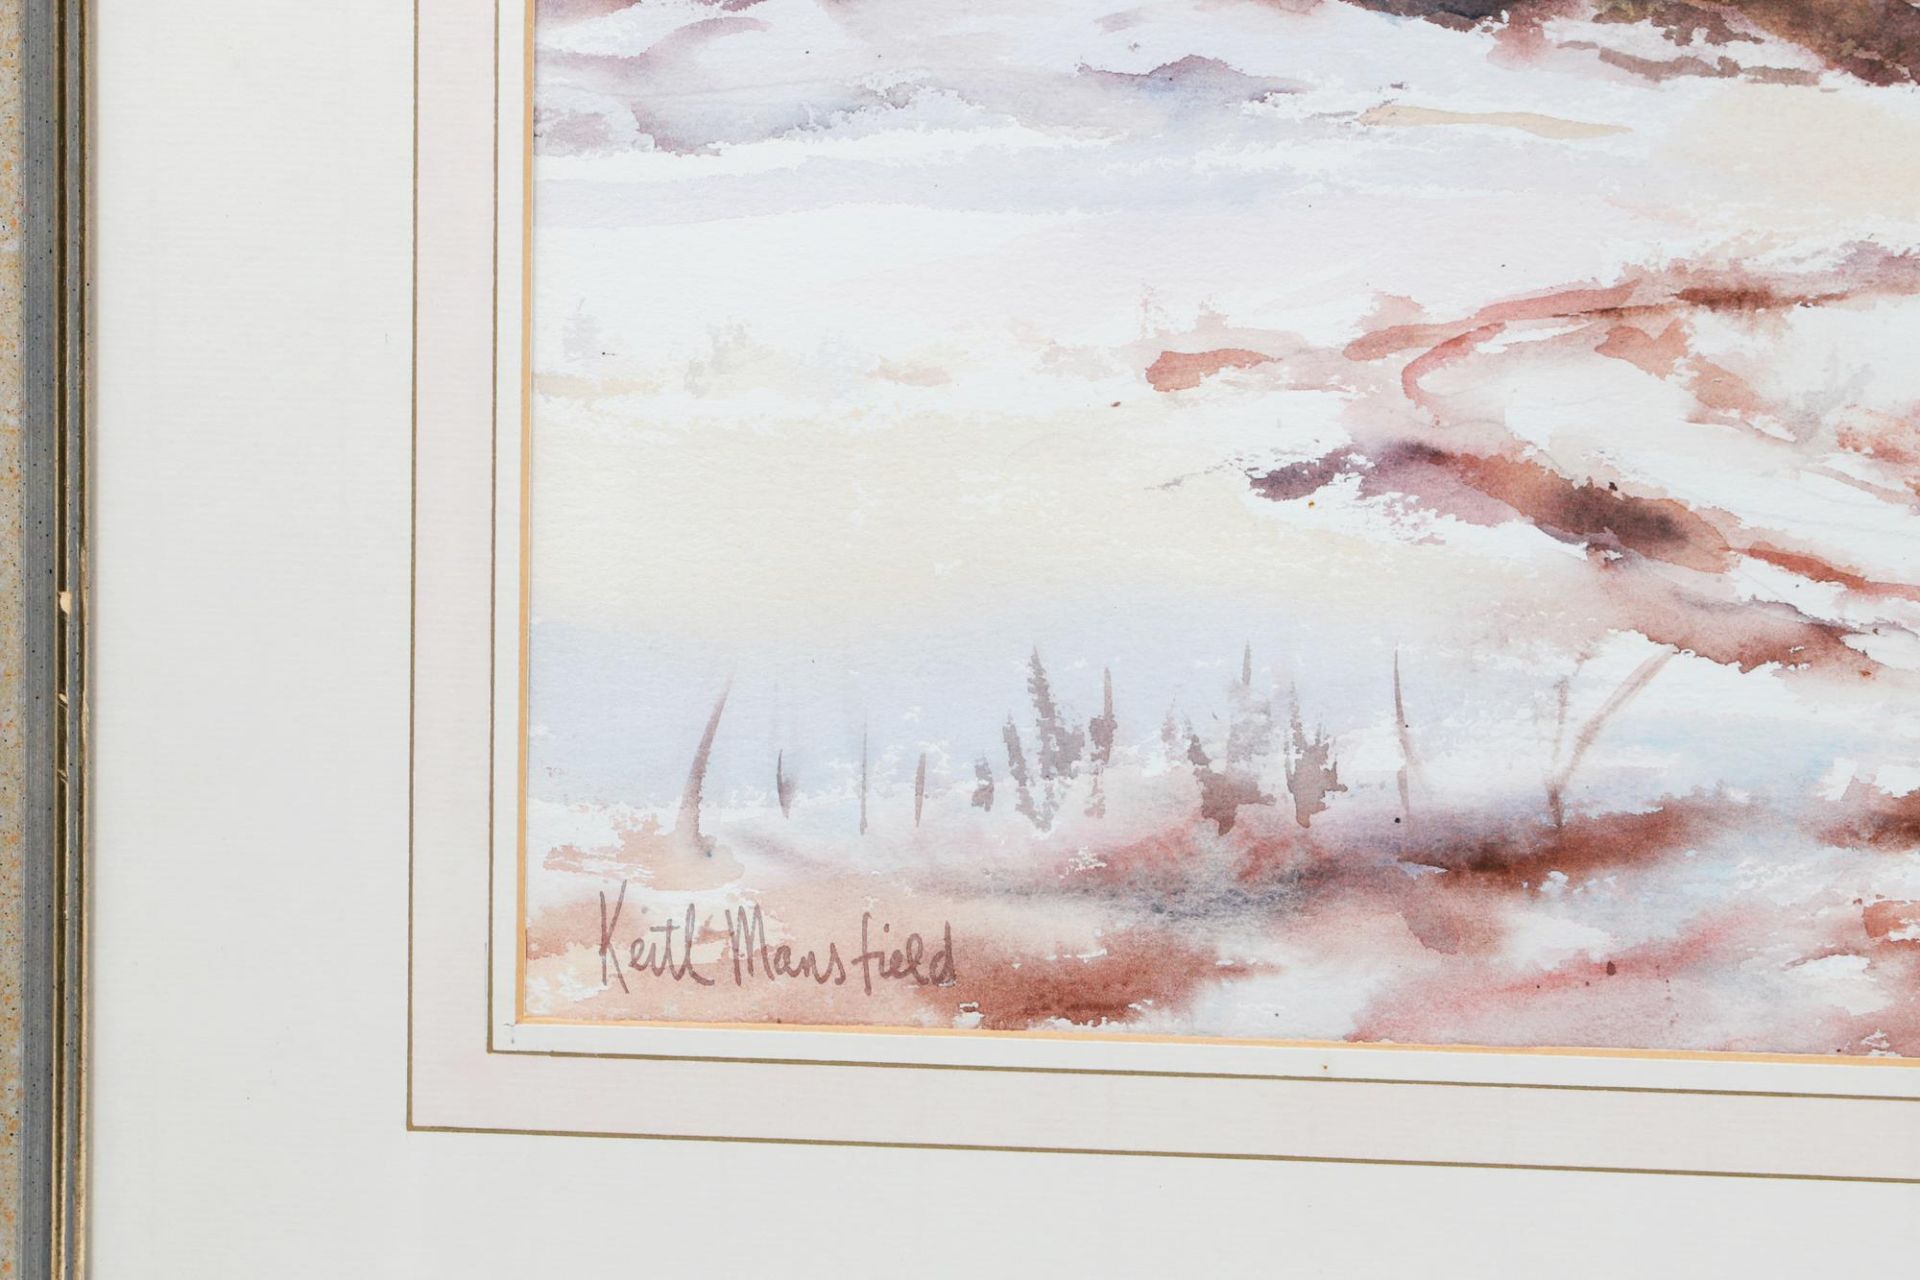 KEITH MANSFIELD (IRISH), 'Winter fields', Watercolour, framed and signed, 29.5" x 22.5" - Image 3 of 4